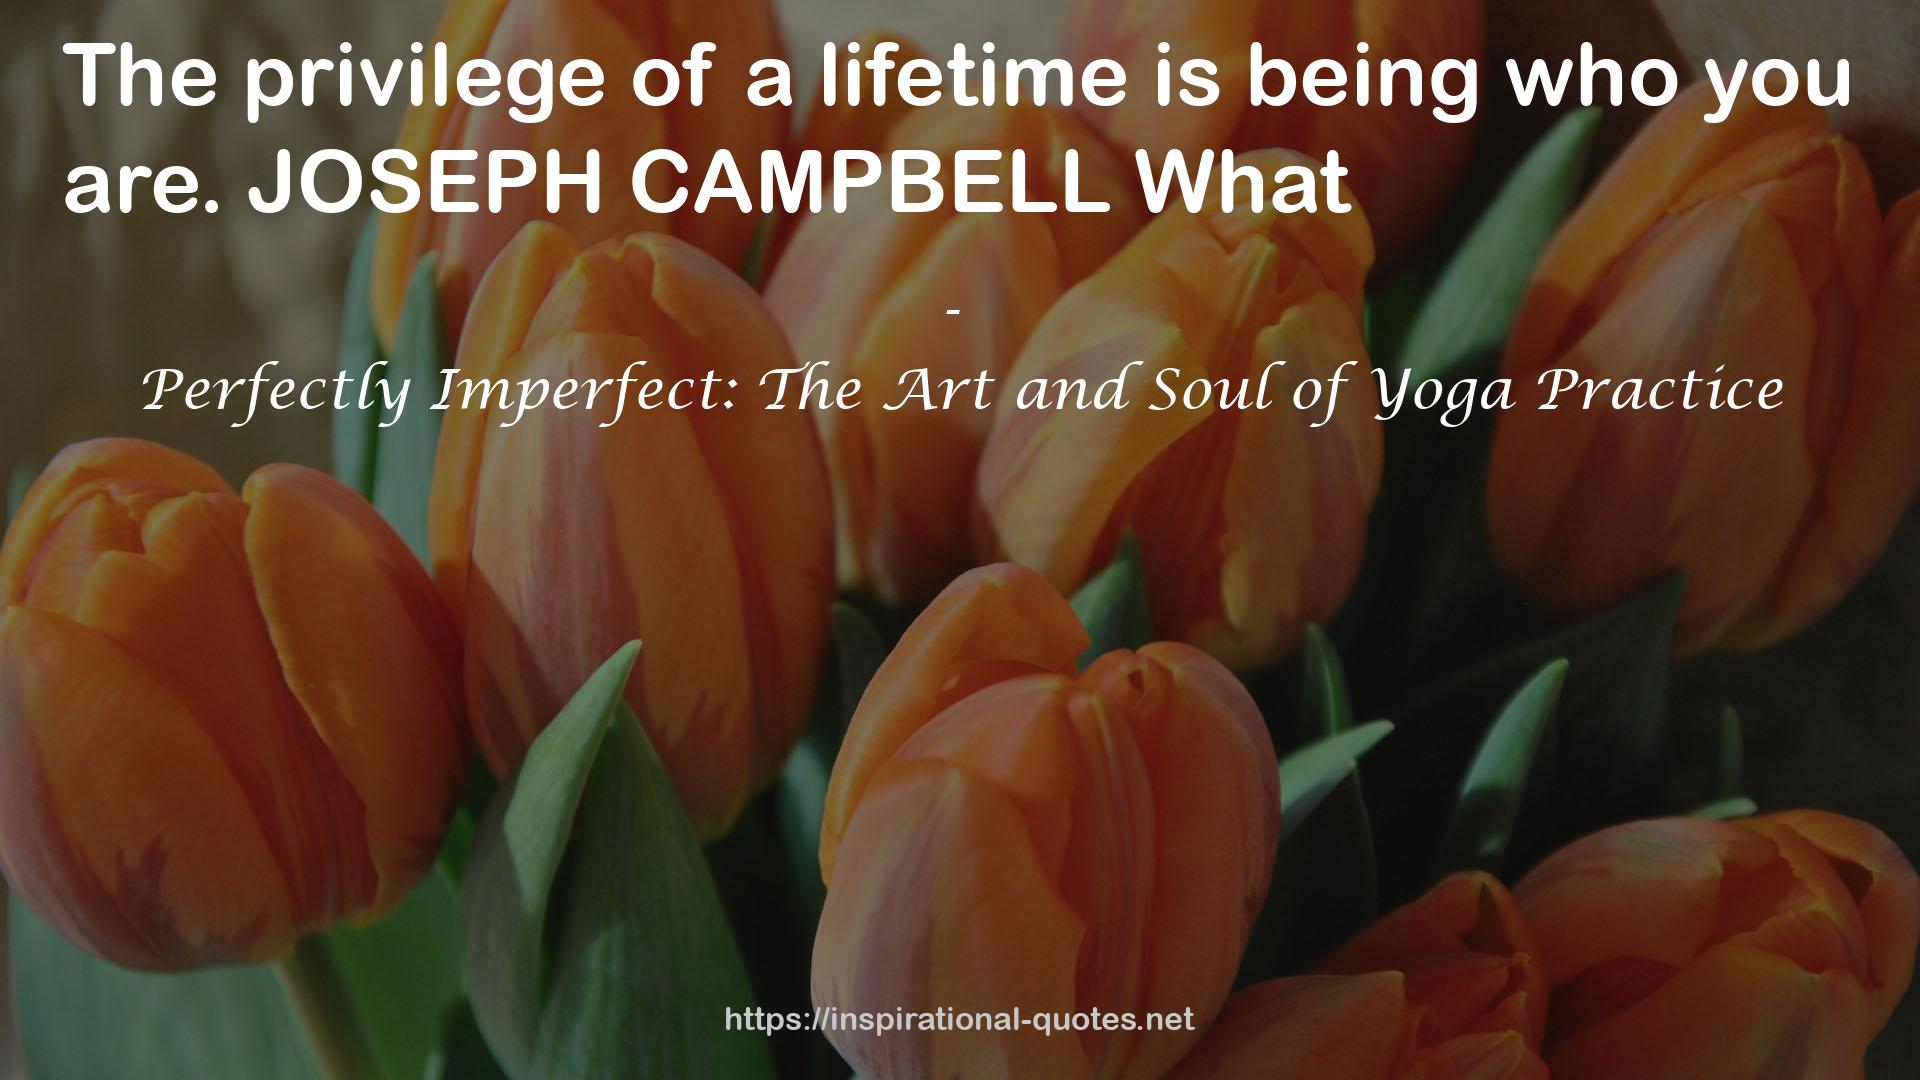 Perfectly Imperfect: The Art and Soul of Yoga Practice QUOTES